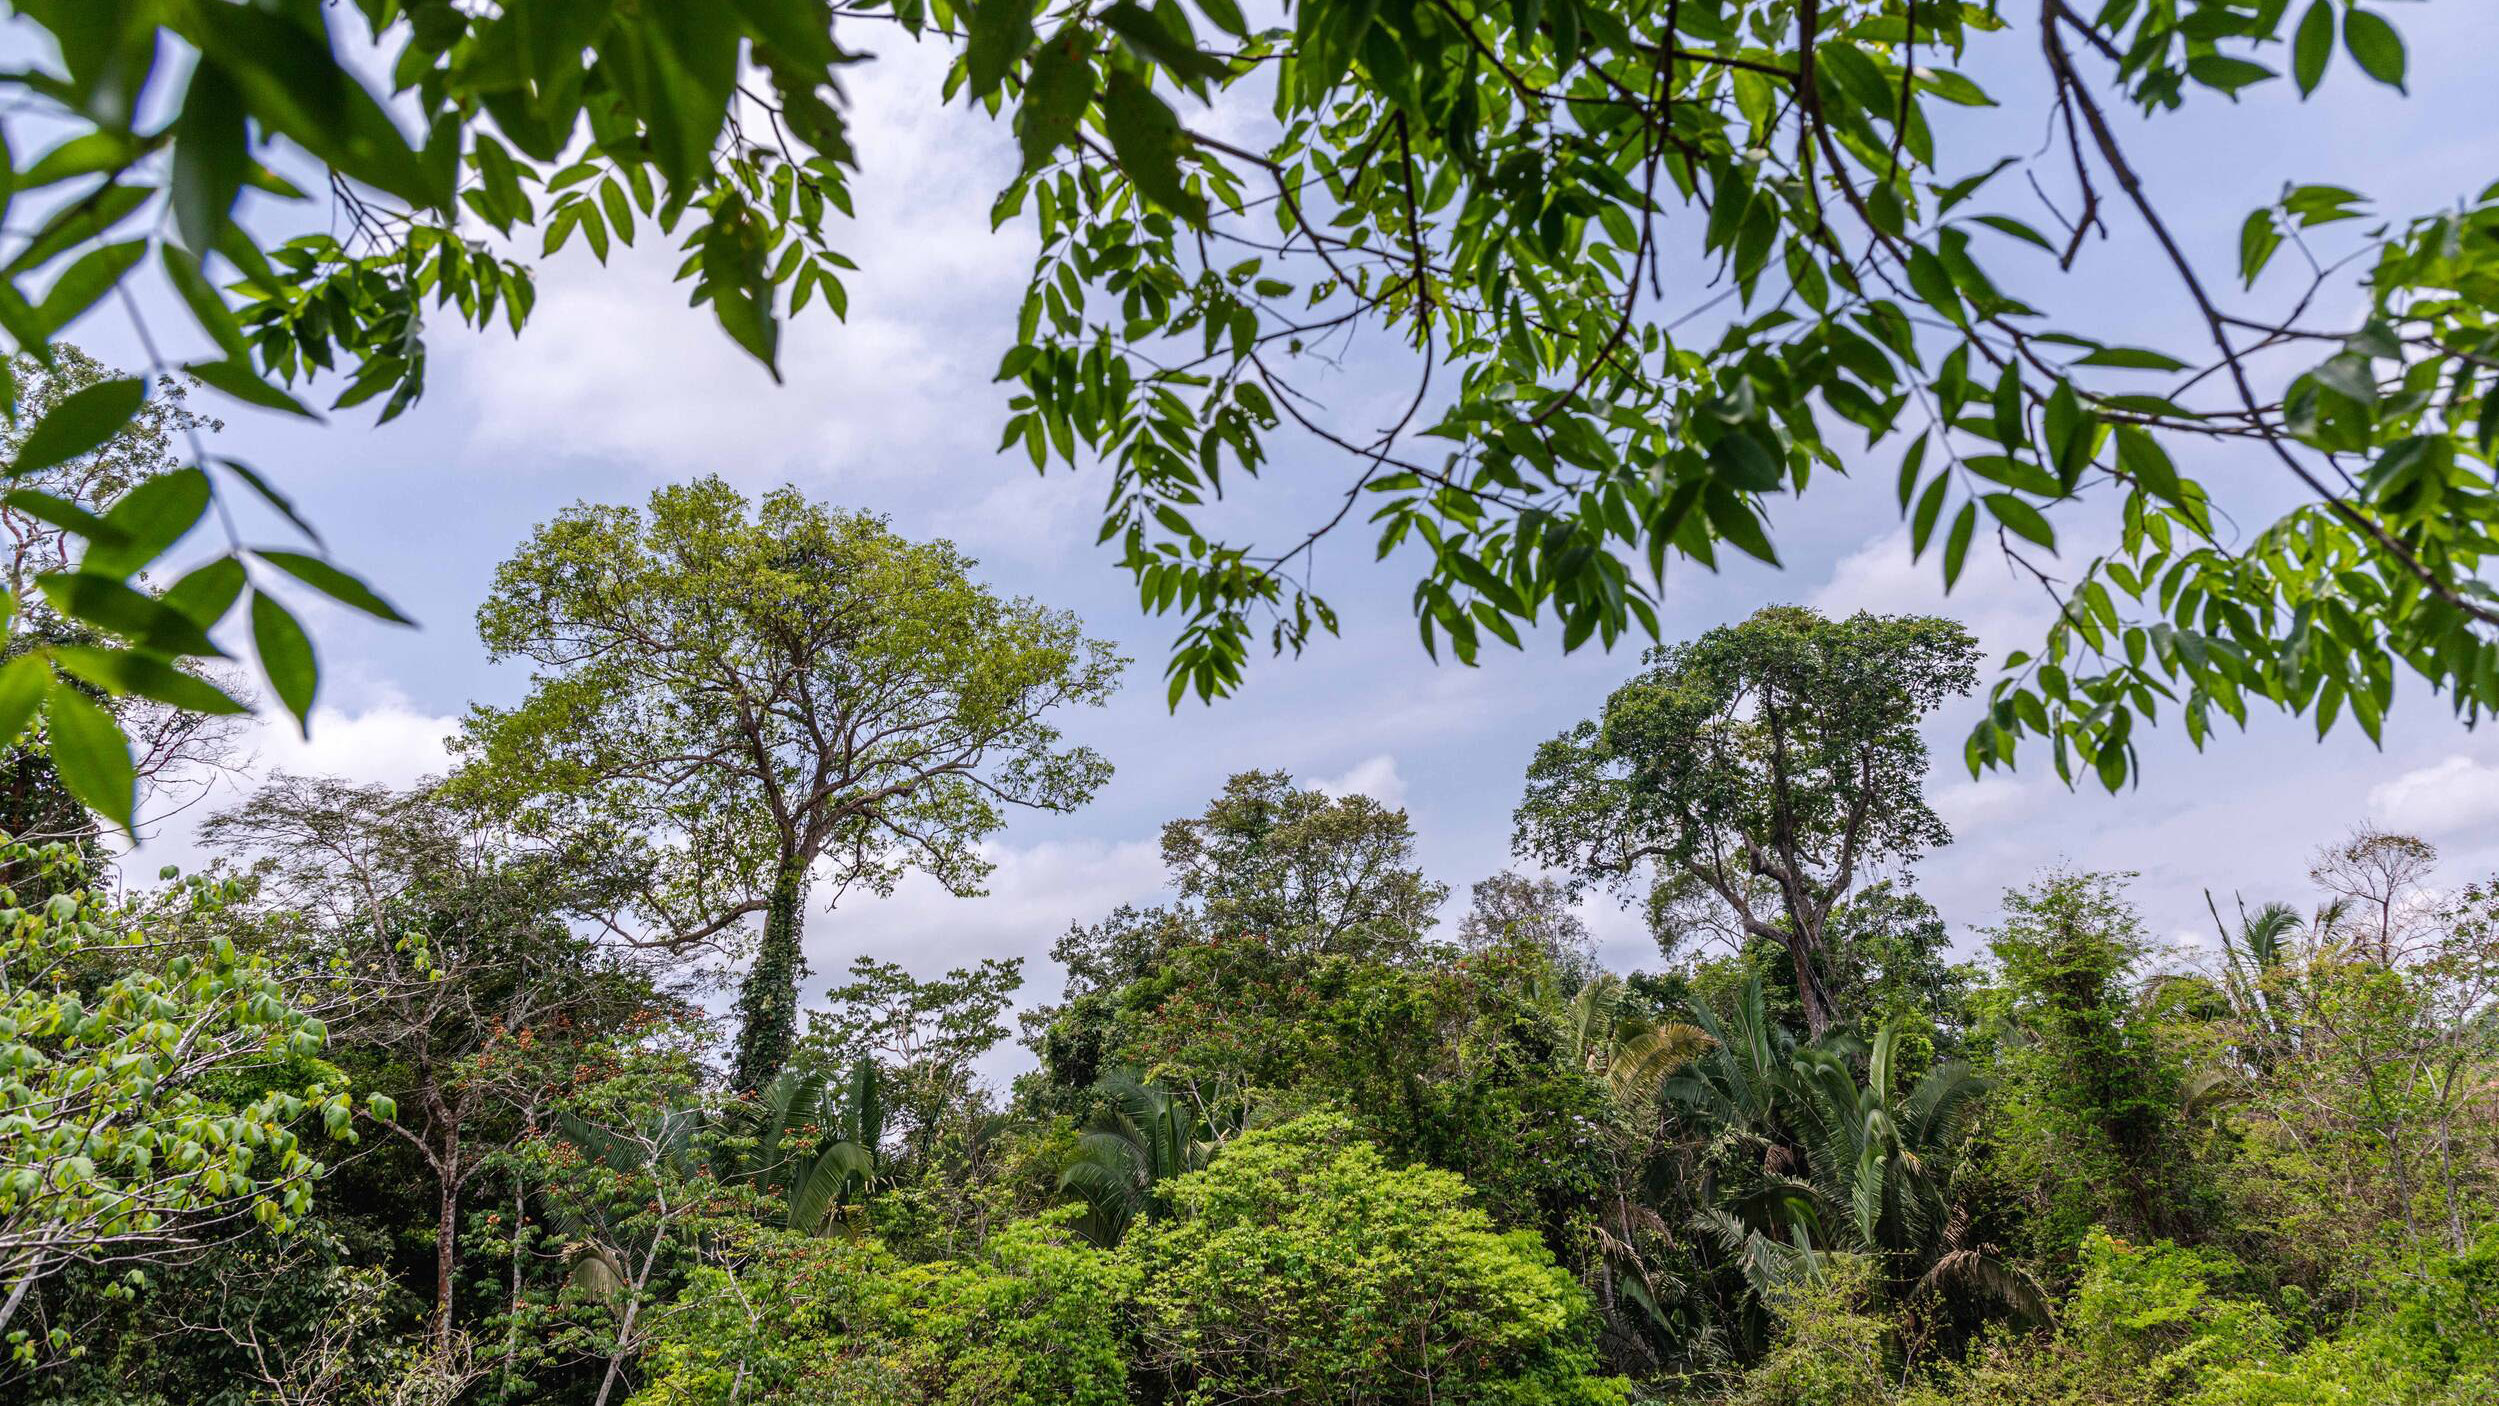 A view of an expansive green rain forest